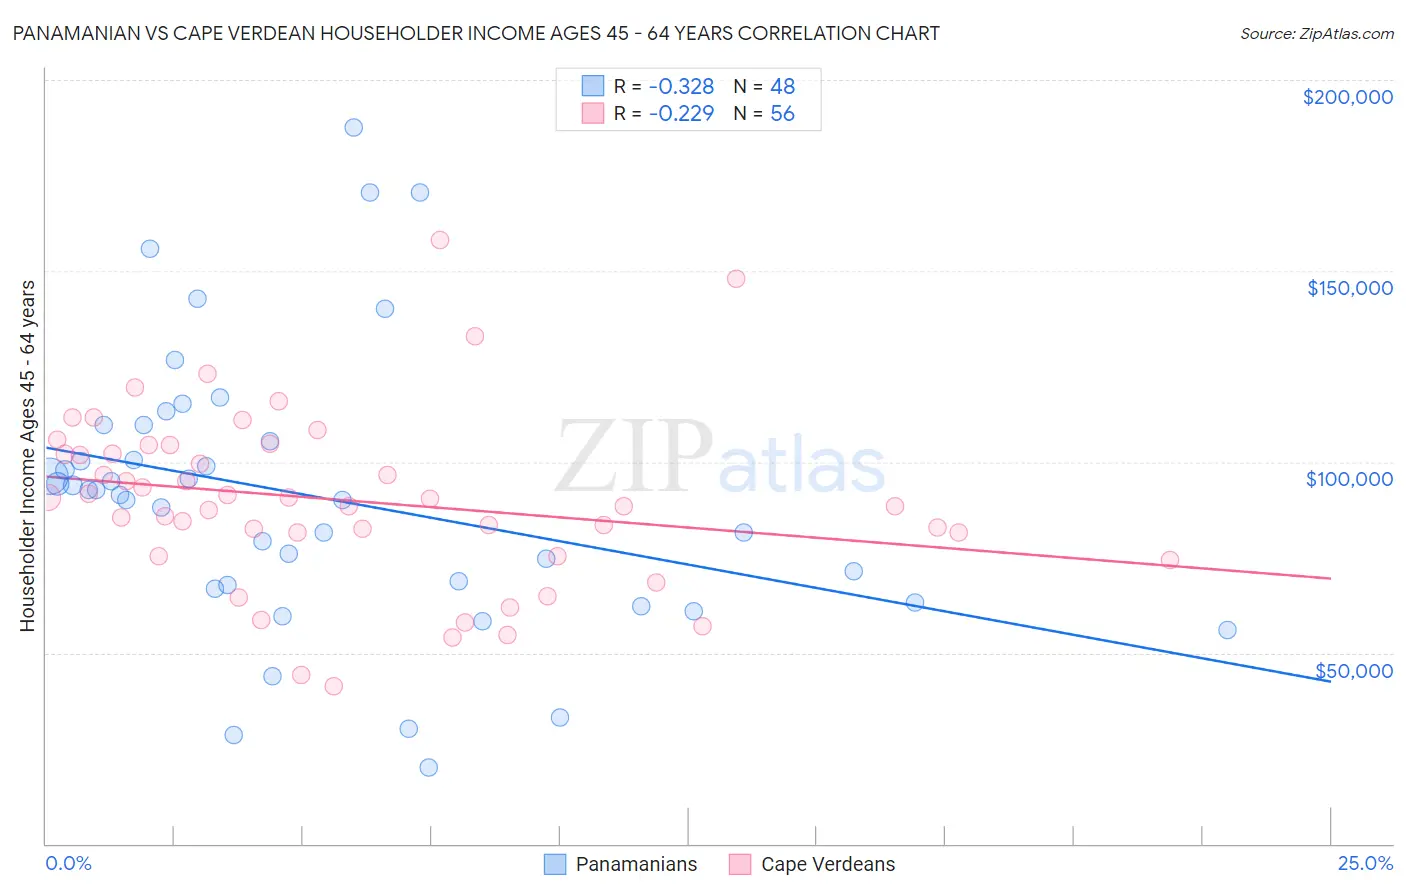 Panamanian vs Cape Verdean Householder Income Ages 45 - 64 years